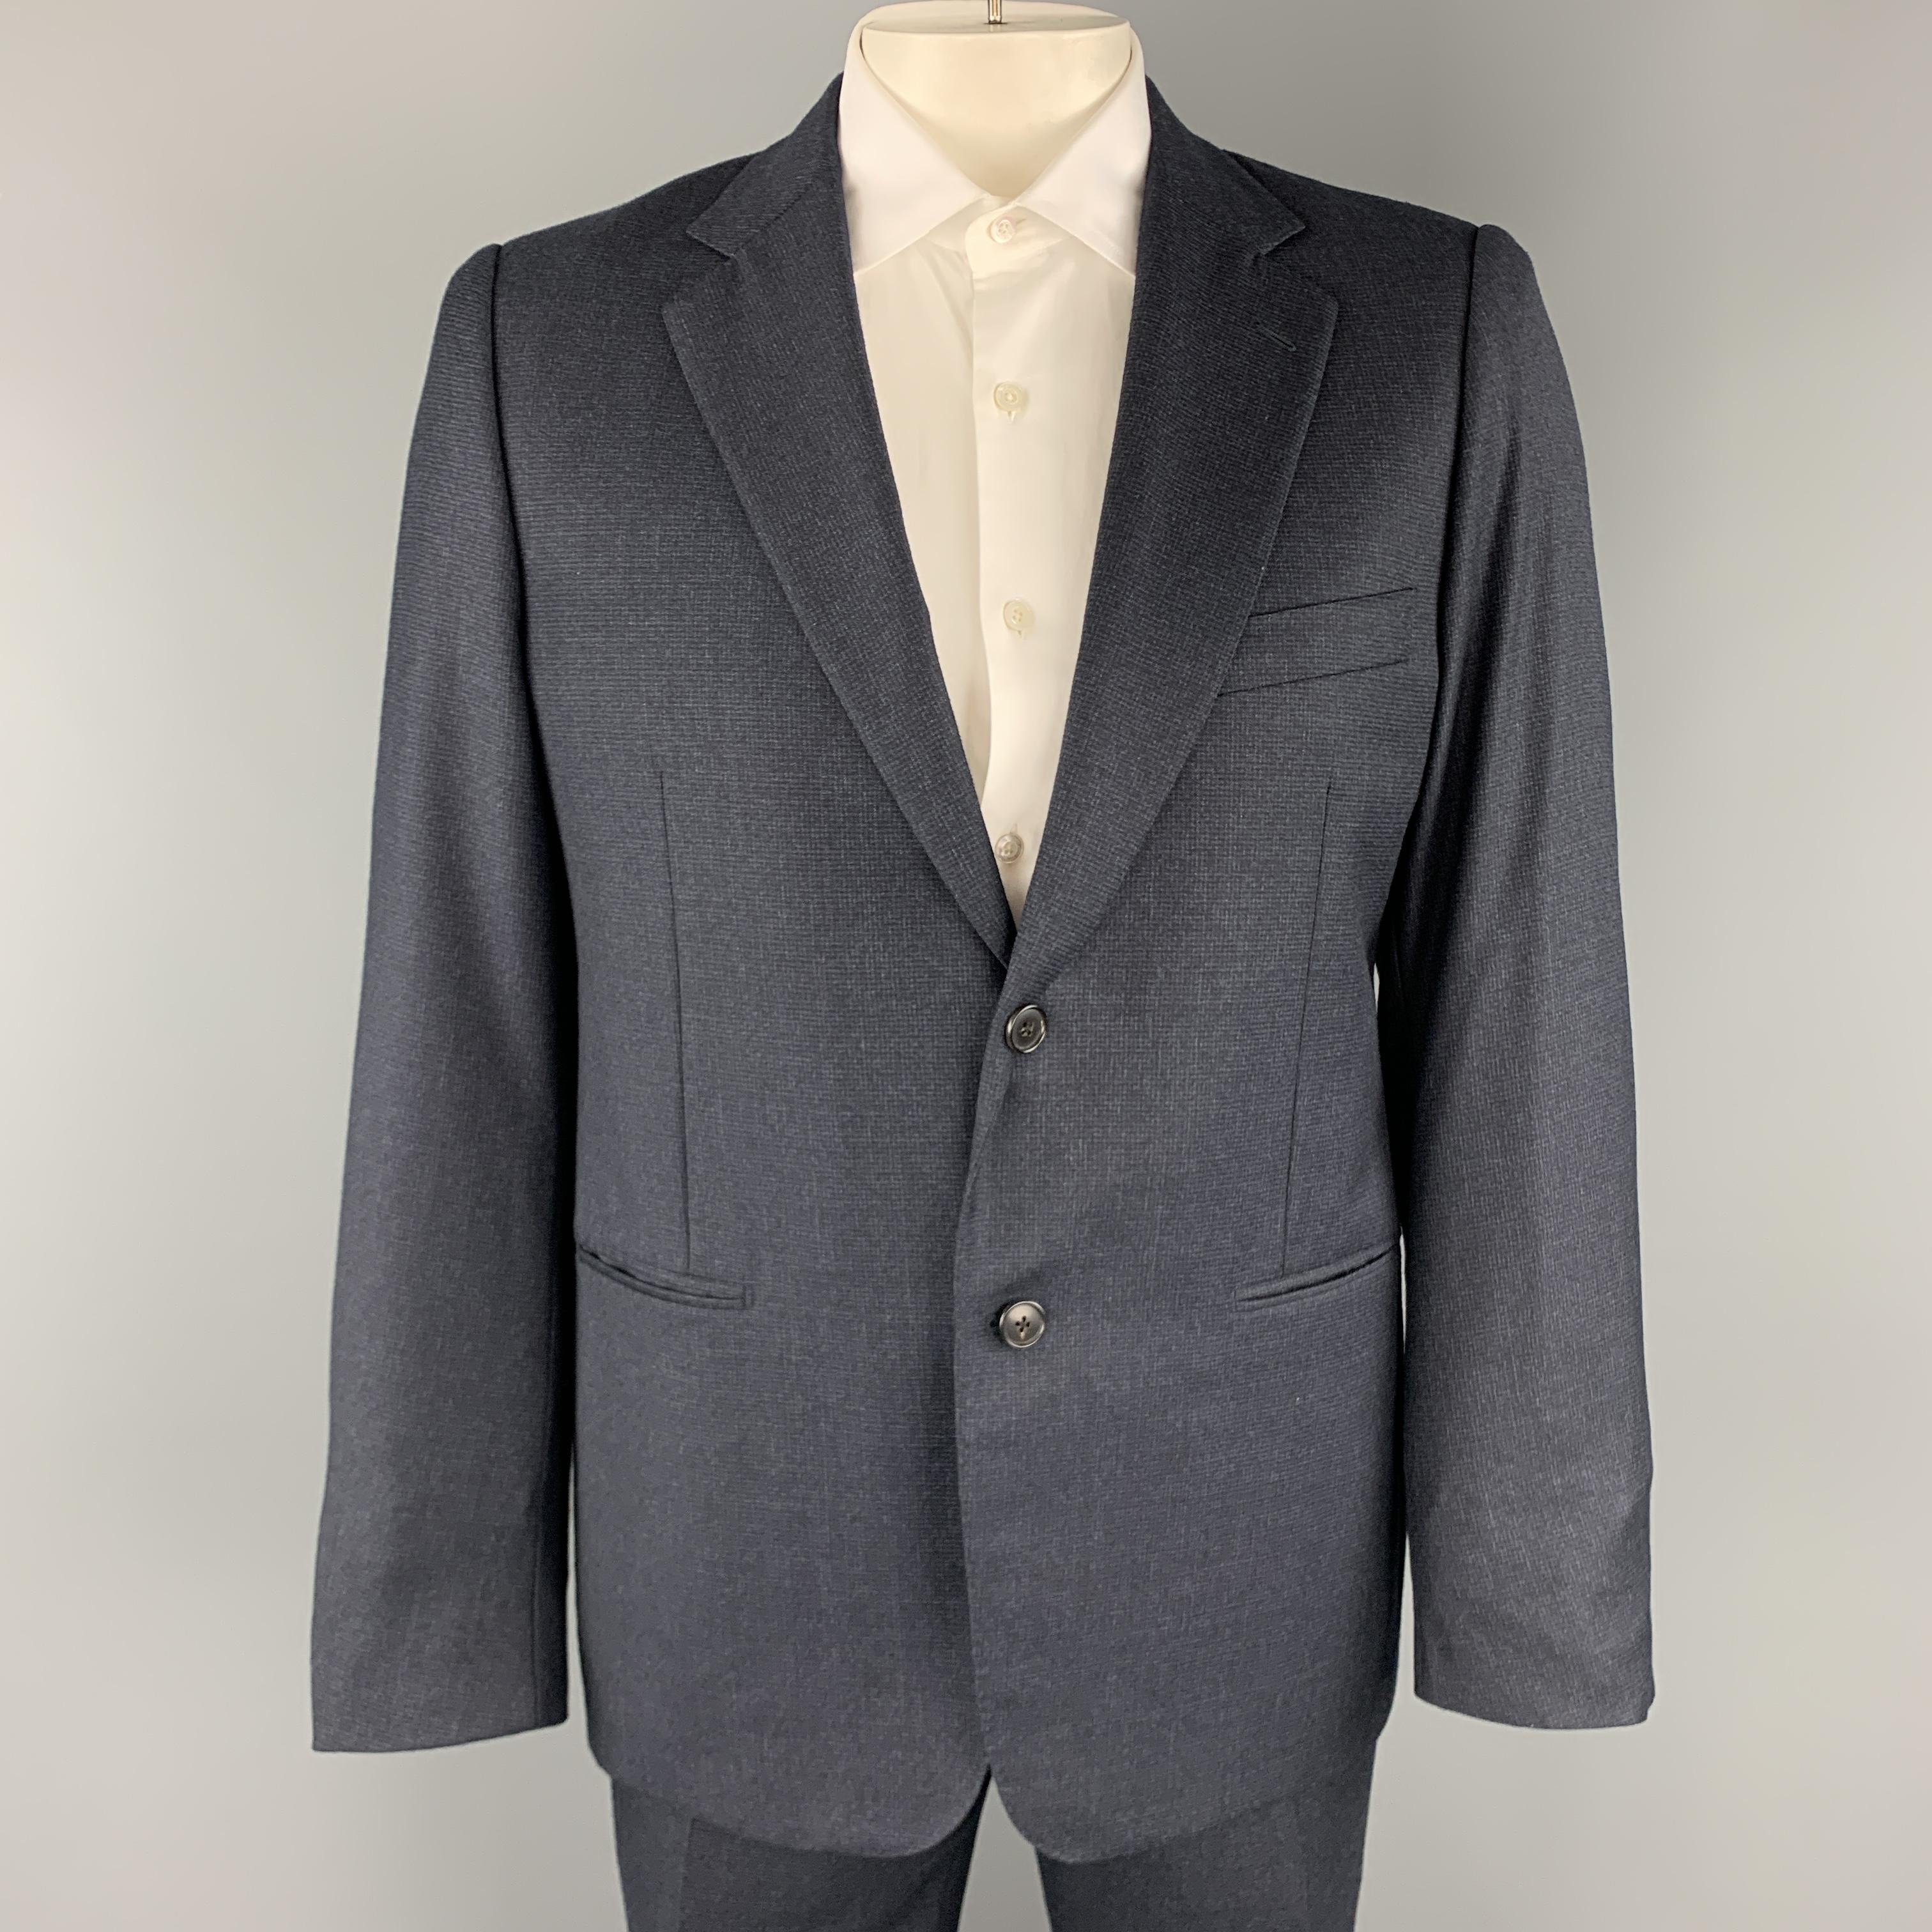 BELVEST suit comes in and includes a single breasted, two button sport coat with notch lapel and matching flat front trousers. Made in Italy.

Excellent Pre-Owned Condition.
Marked: IT 54

Measurements:

-Jacket
Shoulder: 17.5 in.
Chest: 45